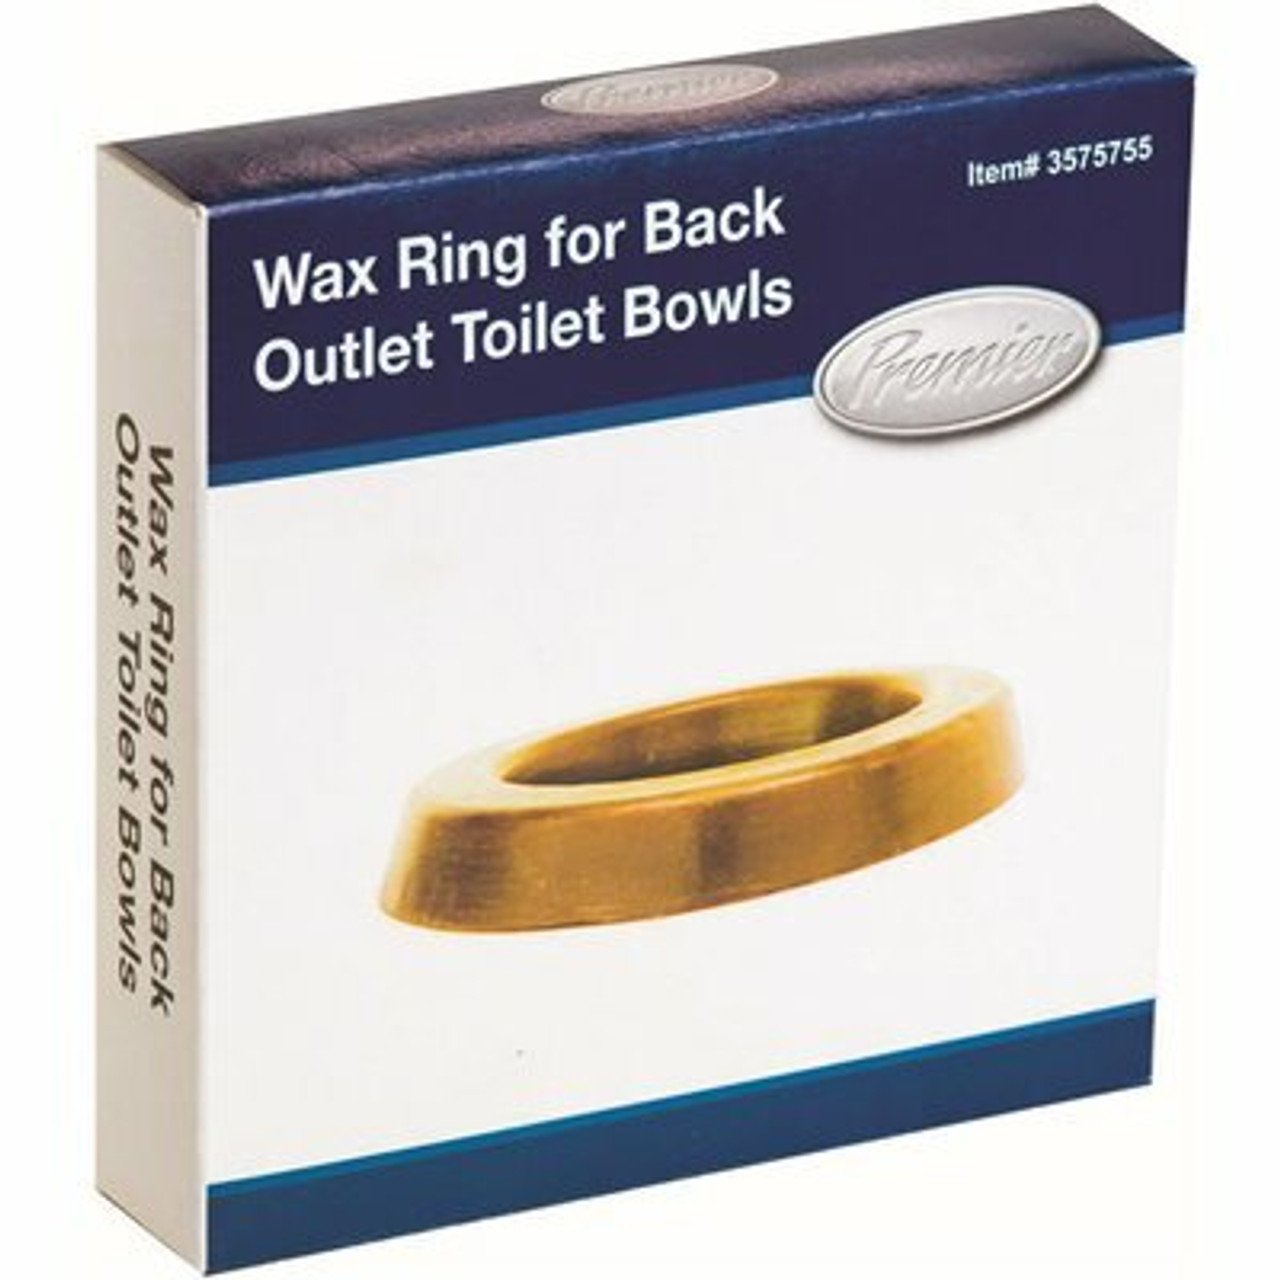 Premier Wax Ring For Back Outlet Toilet Bowls